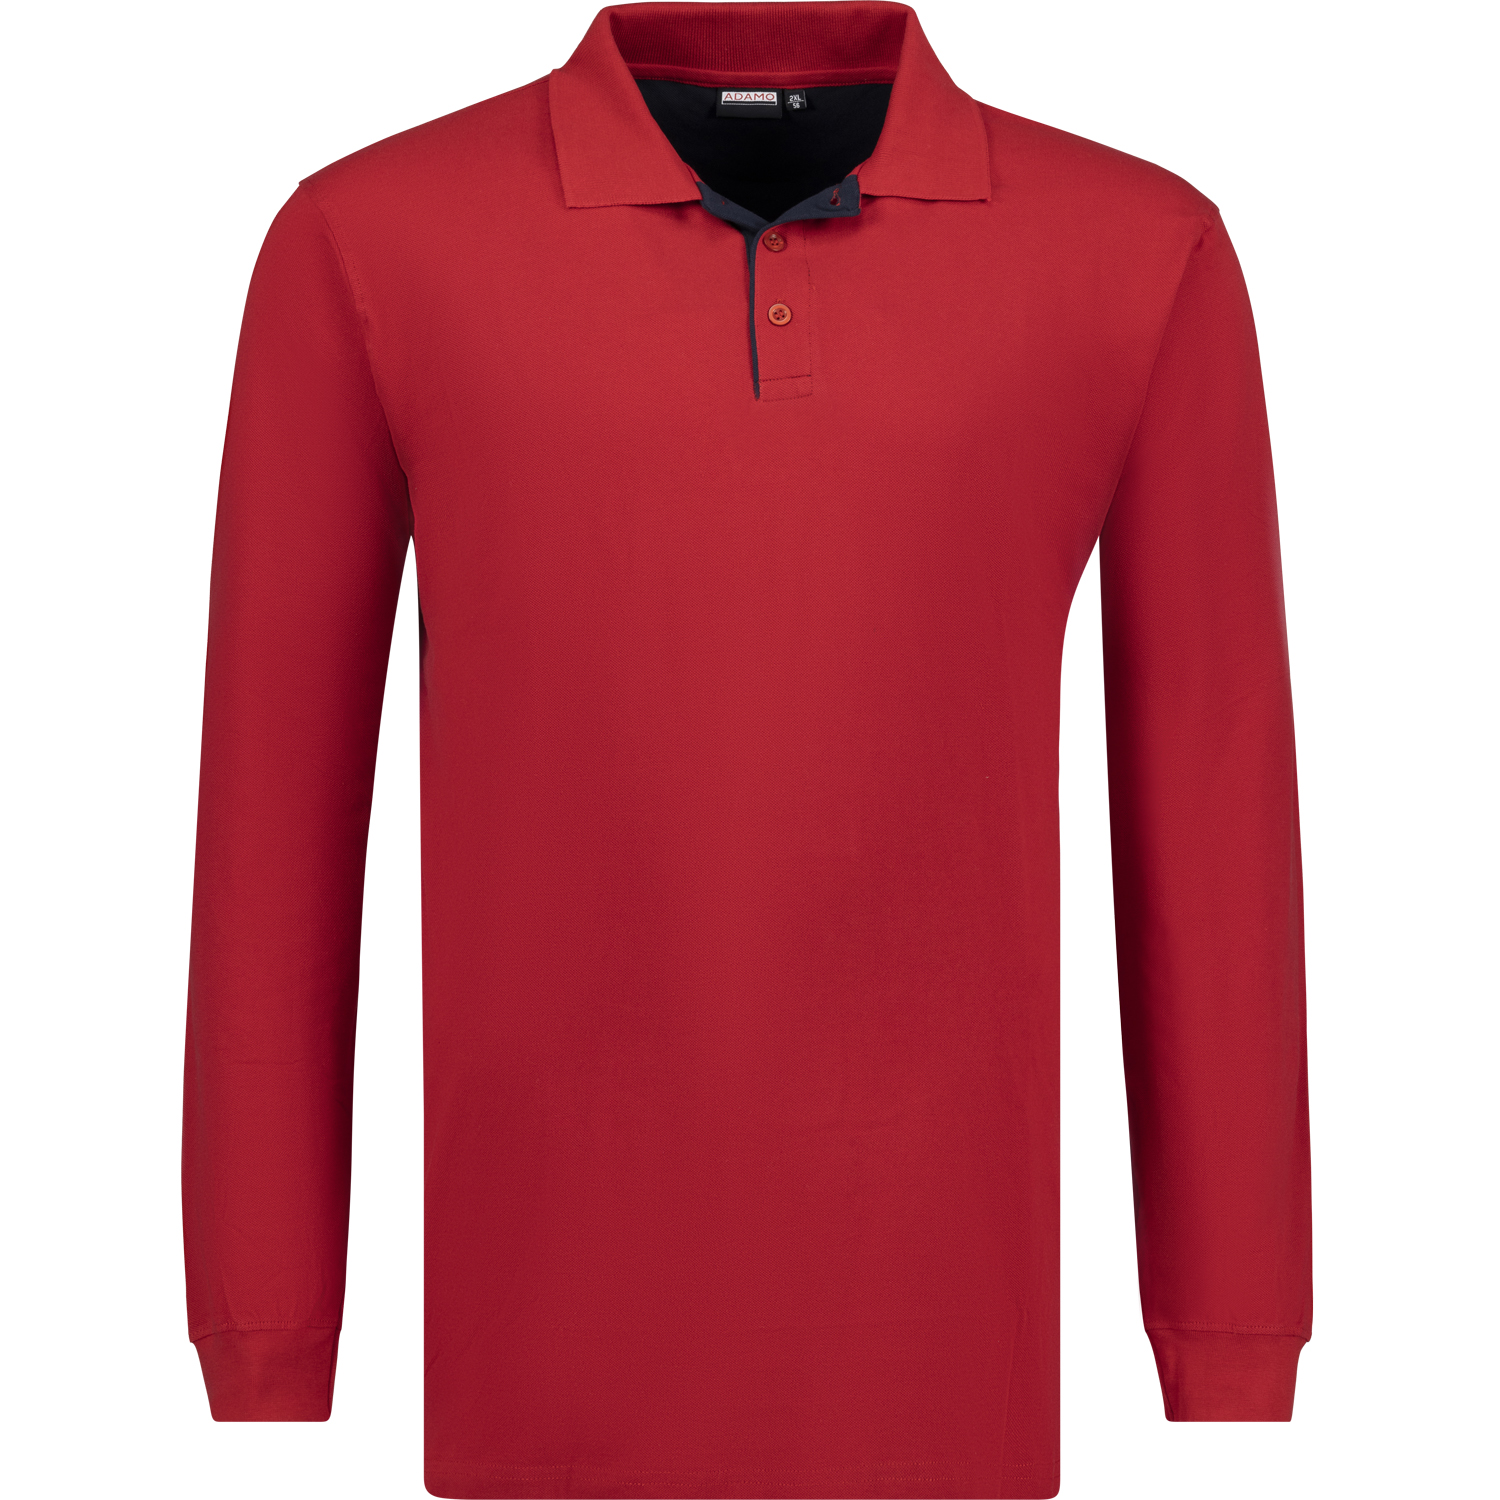 Long sleeve polo shirt COMFORT FIT in red serie Peter by Adamo up to oversize 12XL